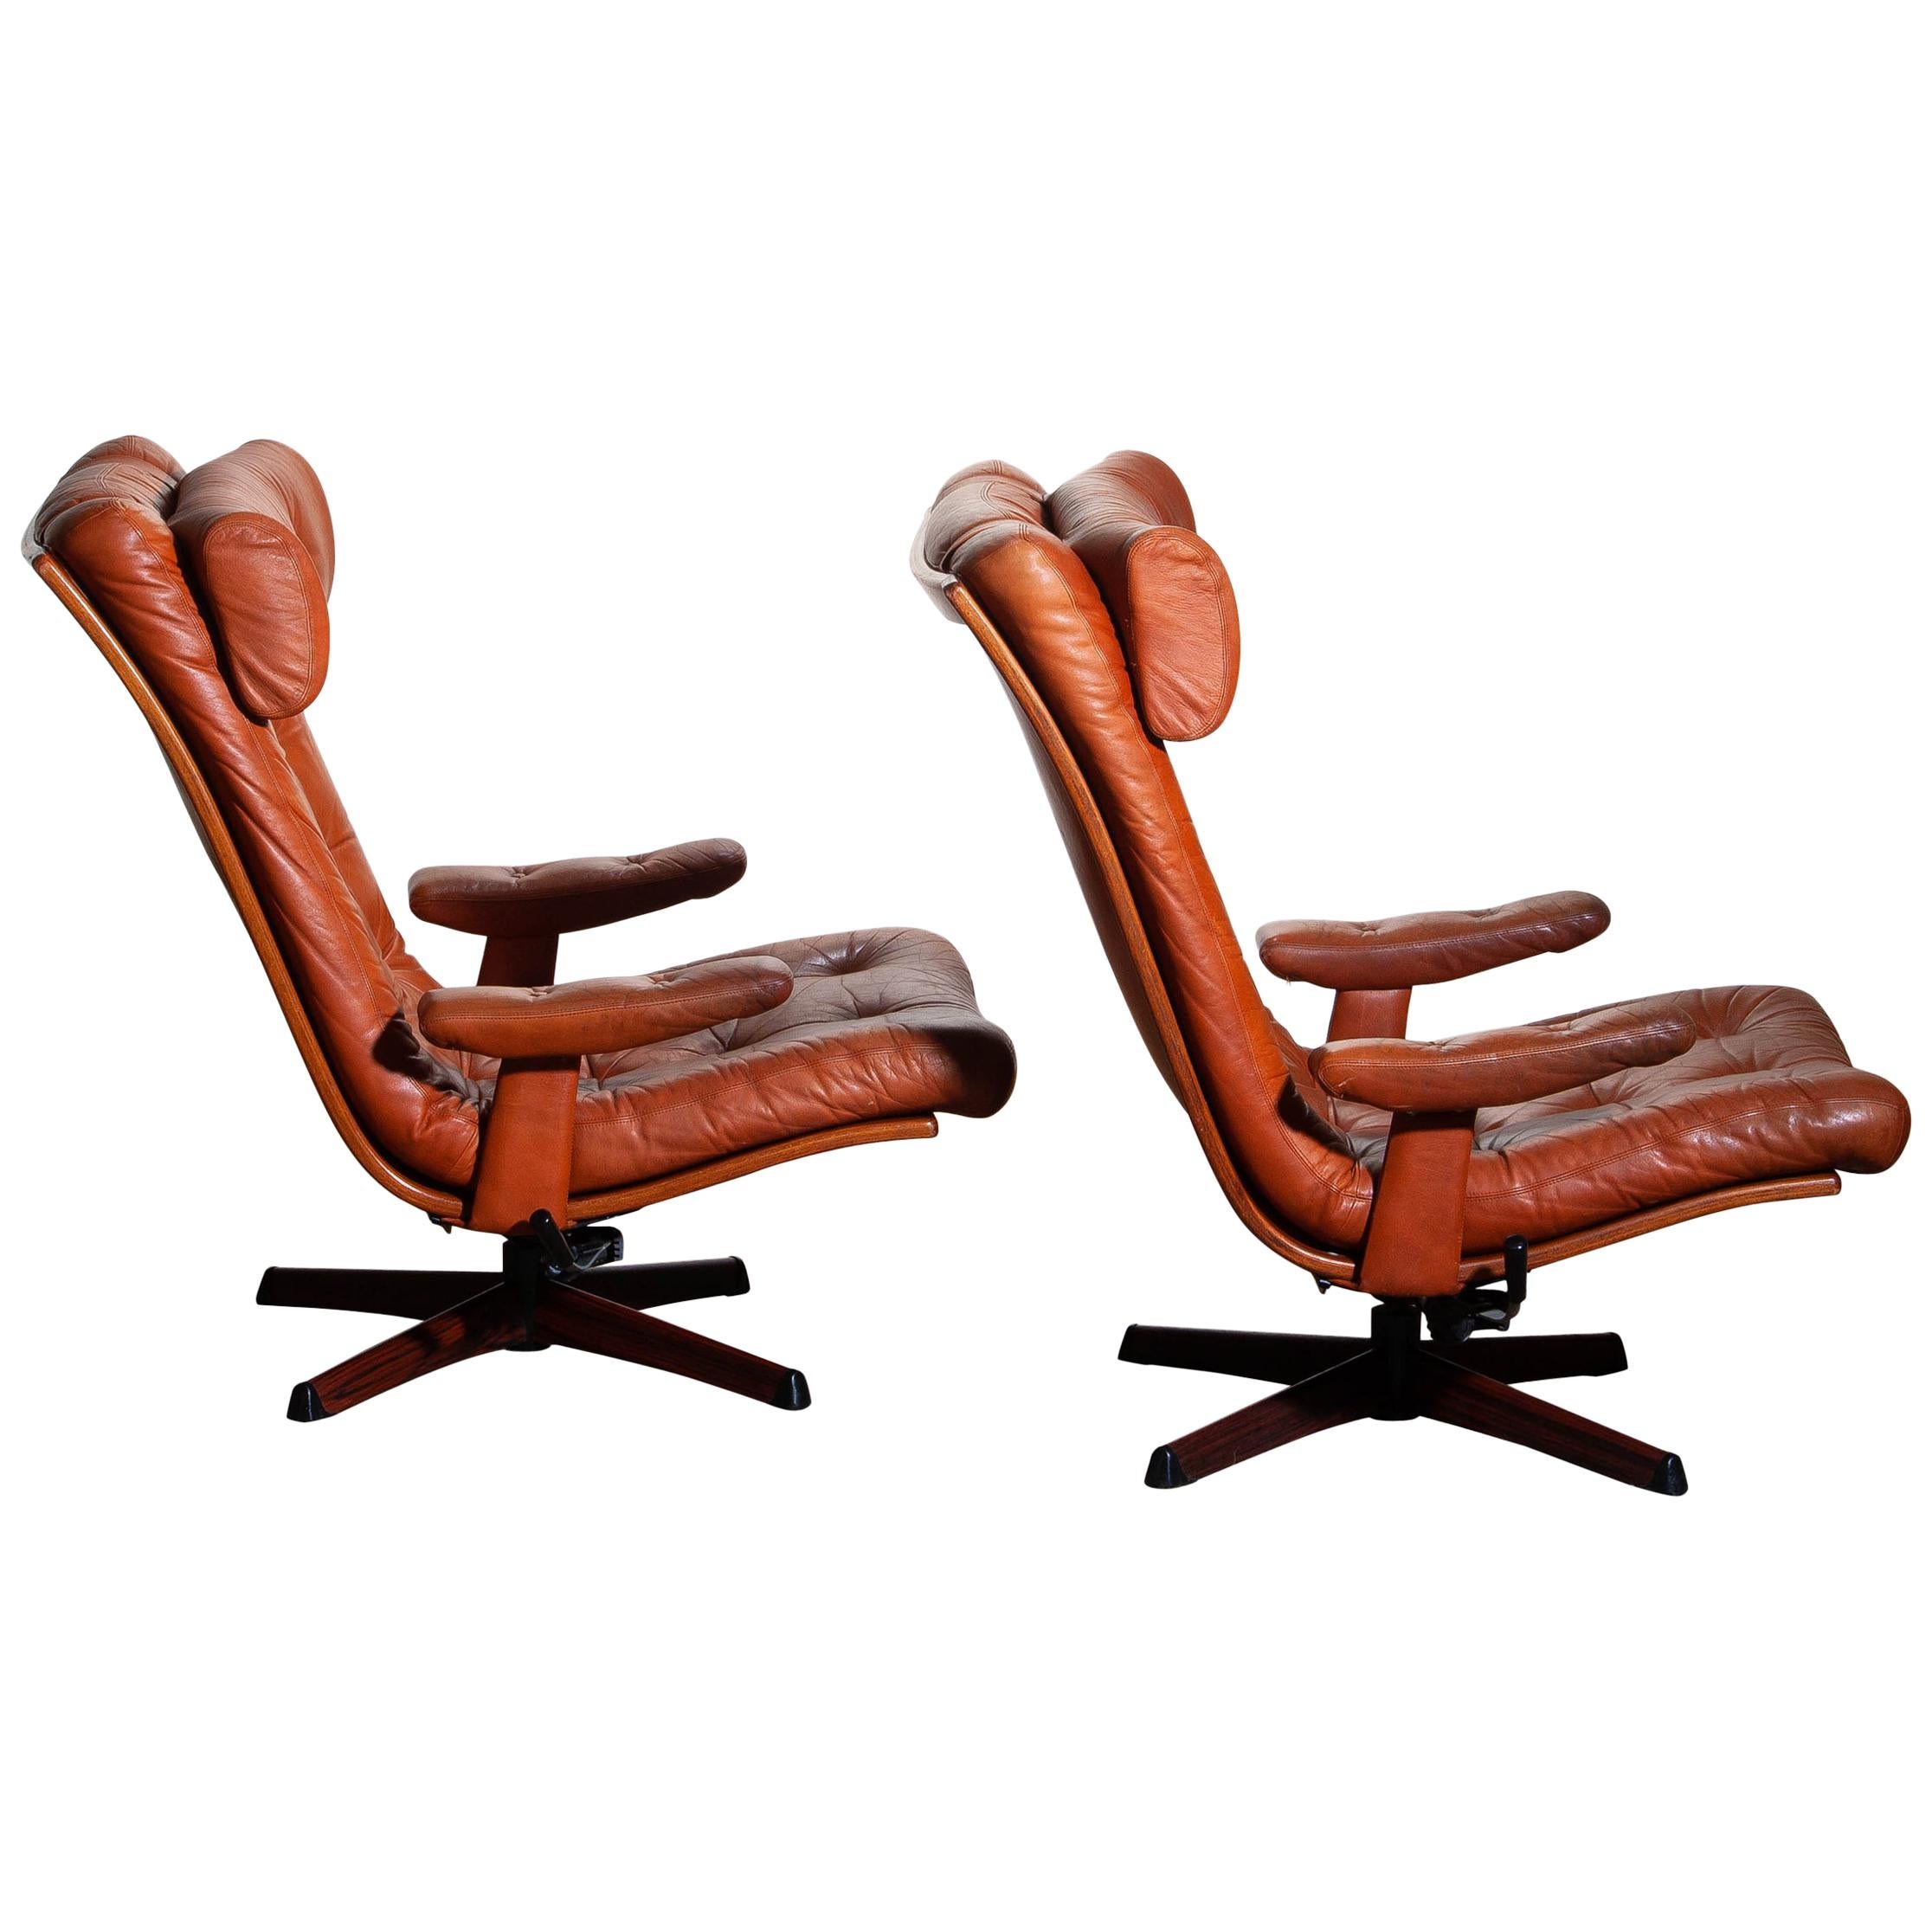 1960s Pair of Cognac Leather Swivel and Relax Lounge Chairs, Göte Design Nässjö